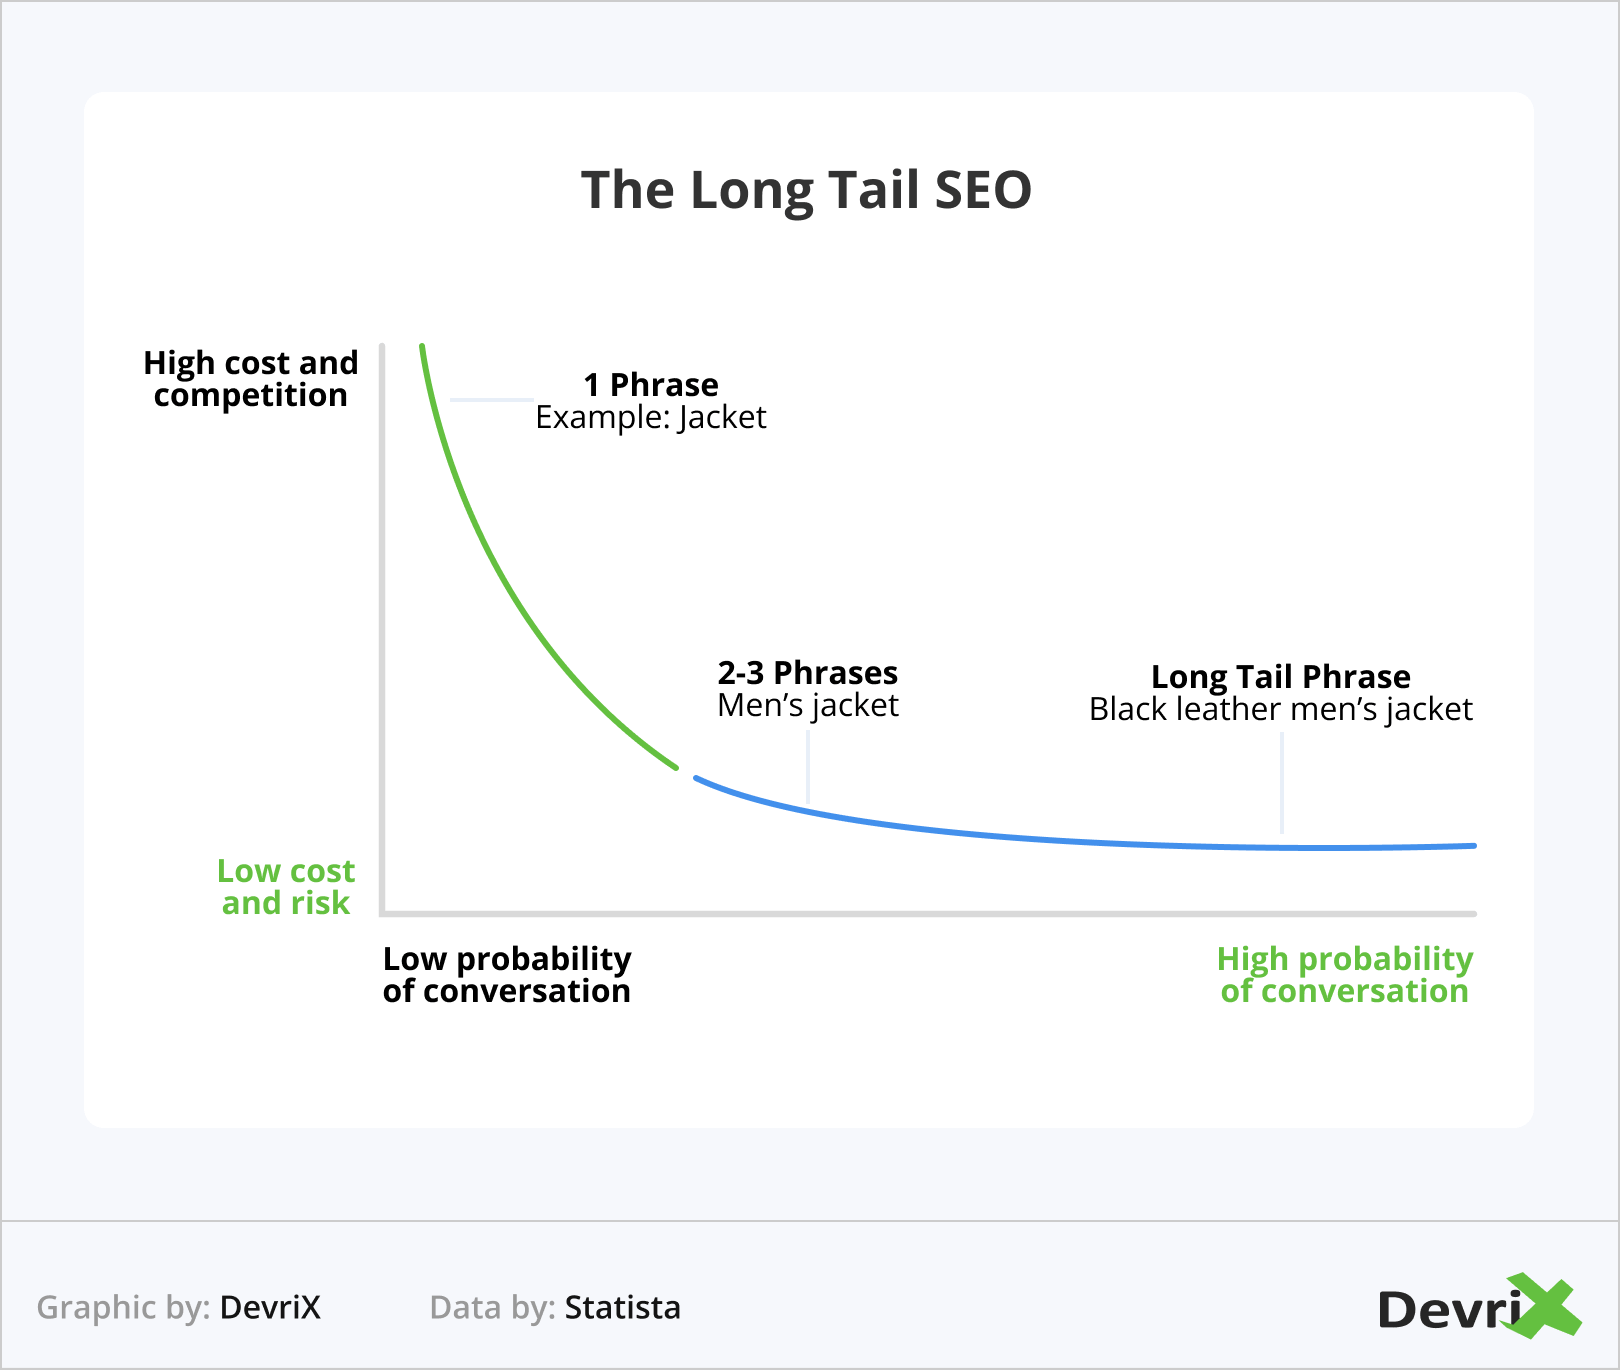 The Long Tail SEO